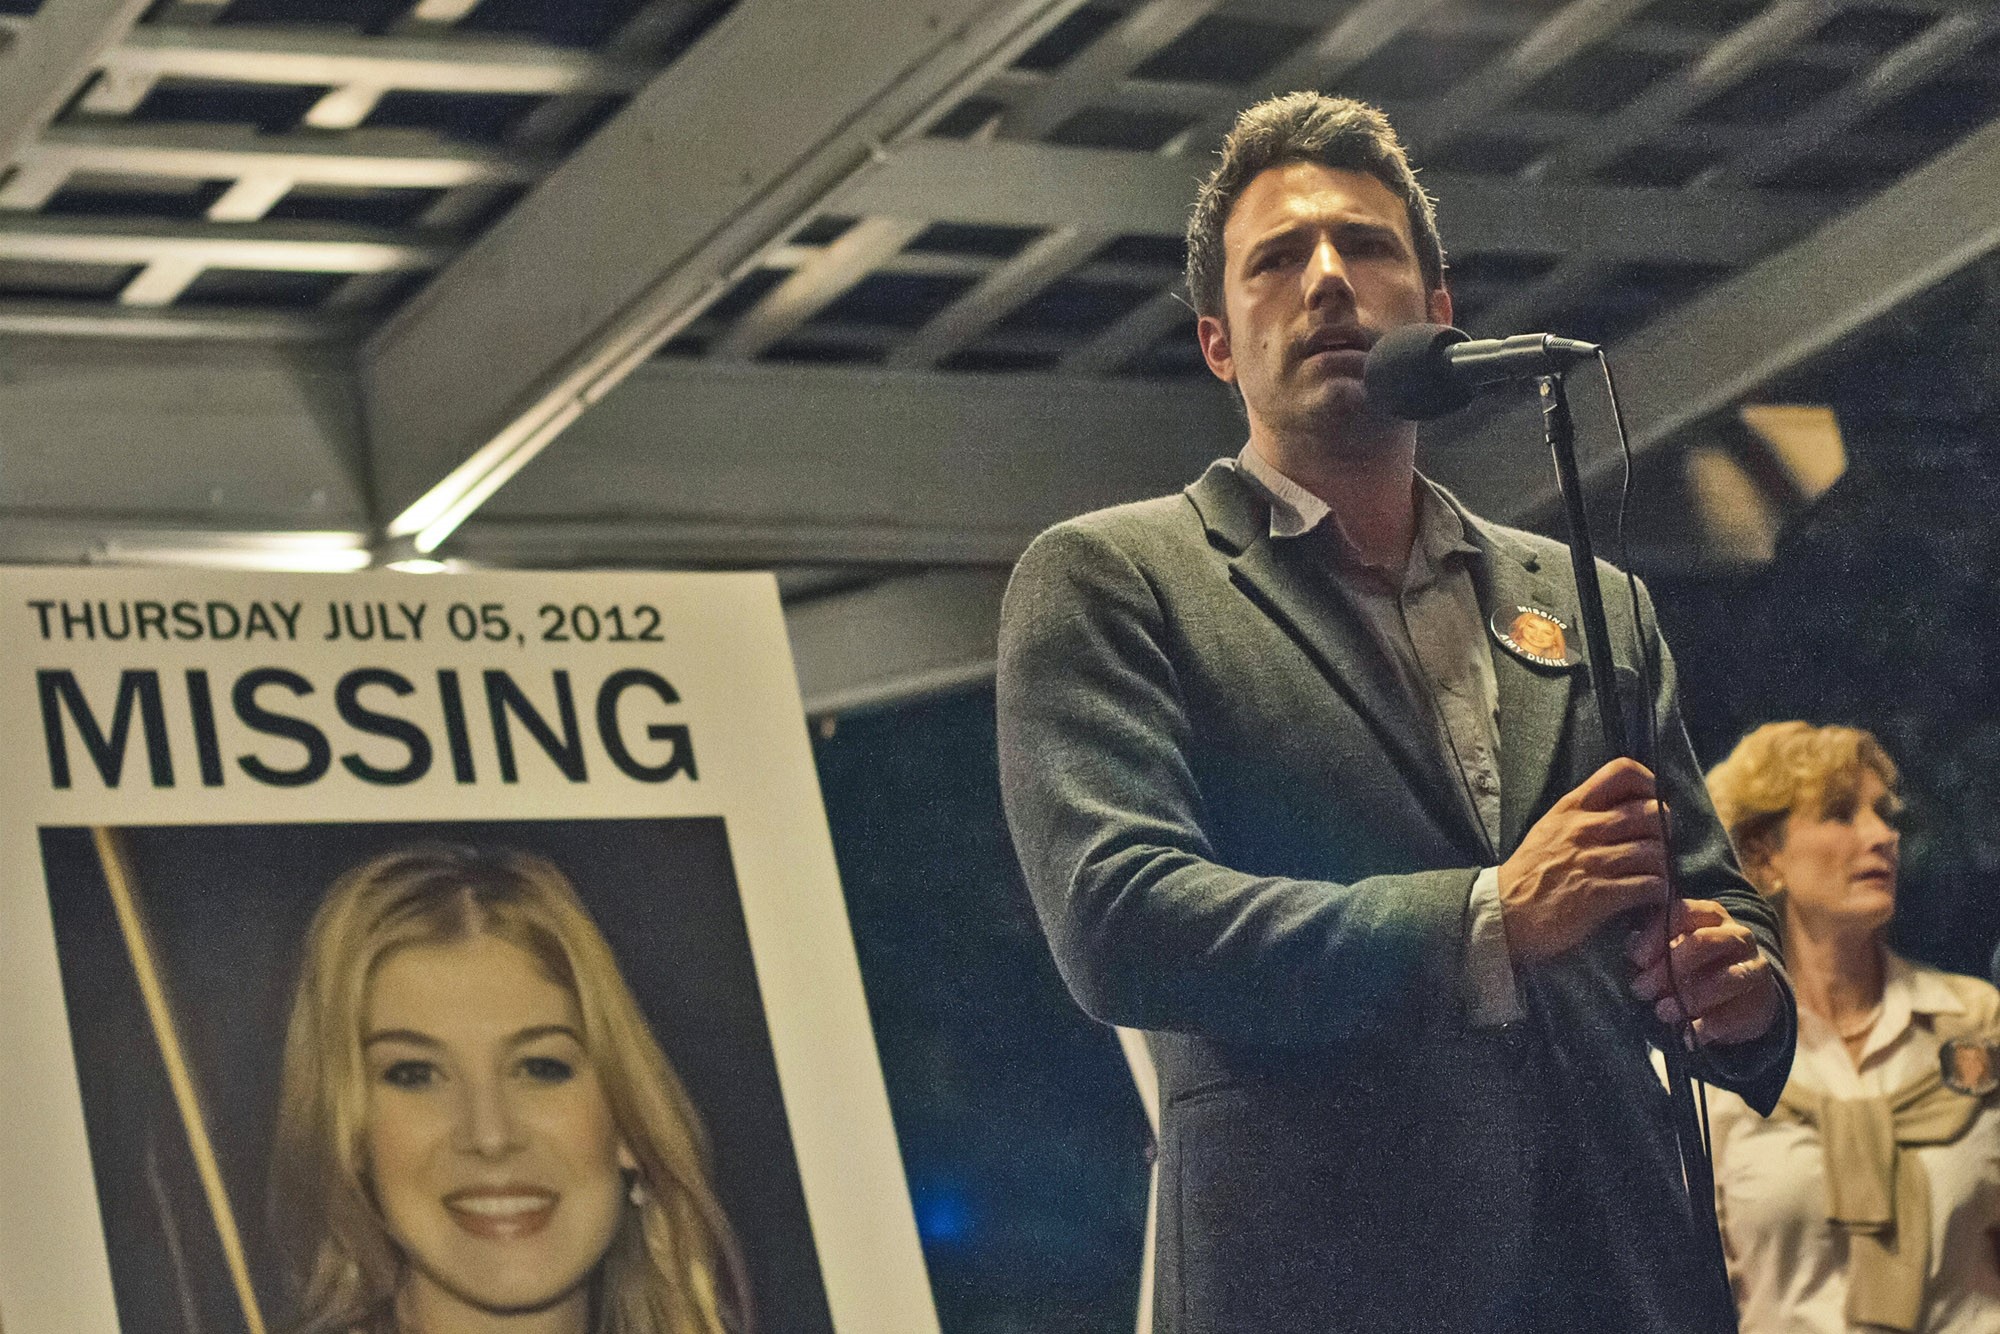 GONE GIRL -- FILM STILL -- DF-01826cc - Nick Dunne (Ben Affleck) finds himself the chief suspect behind the shocking disappearance of his wife Amy (Rosamund Pike), on their fifth anniversary.